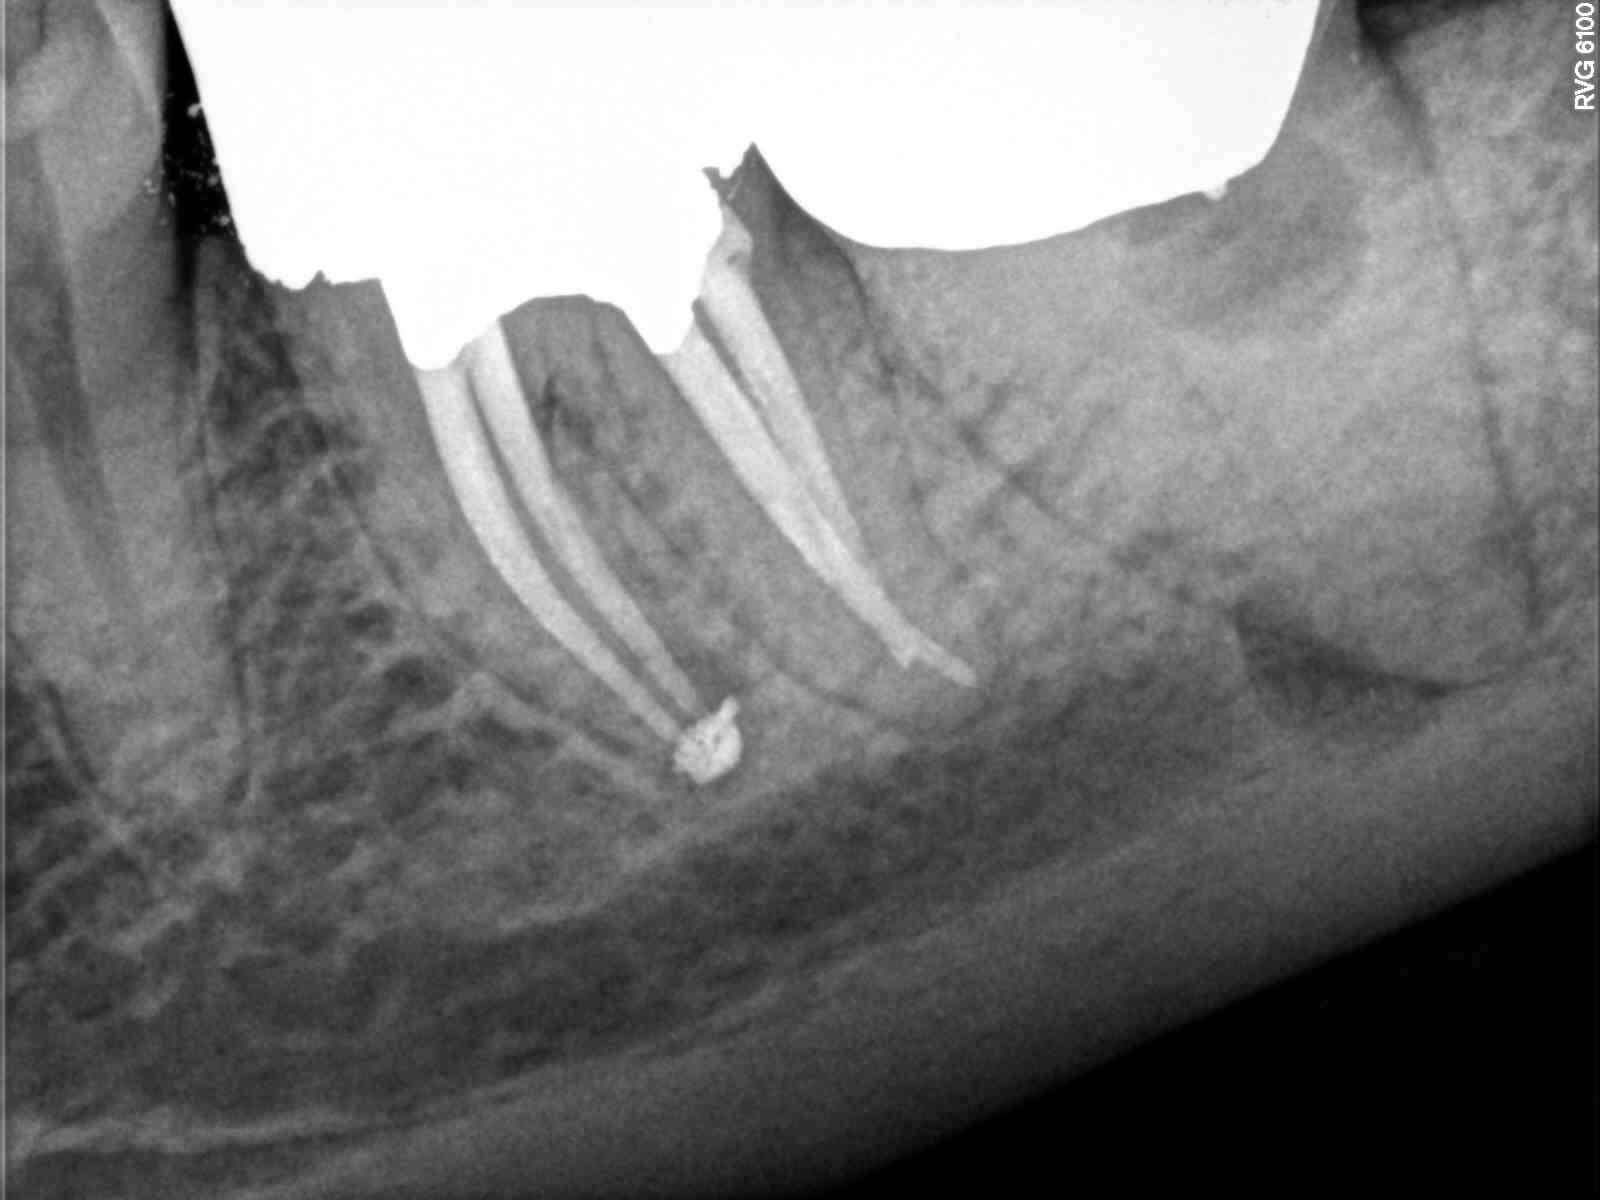 cracked root canal filling